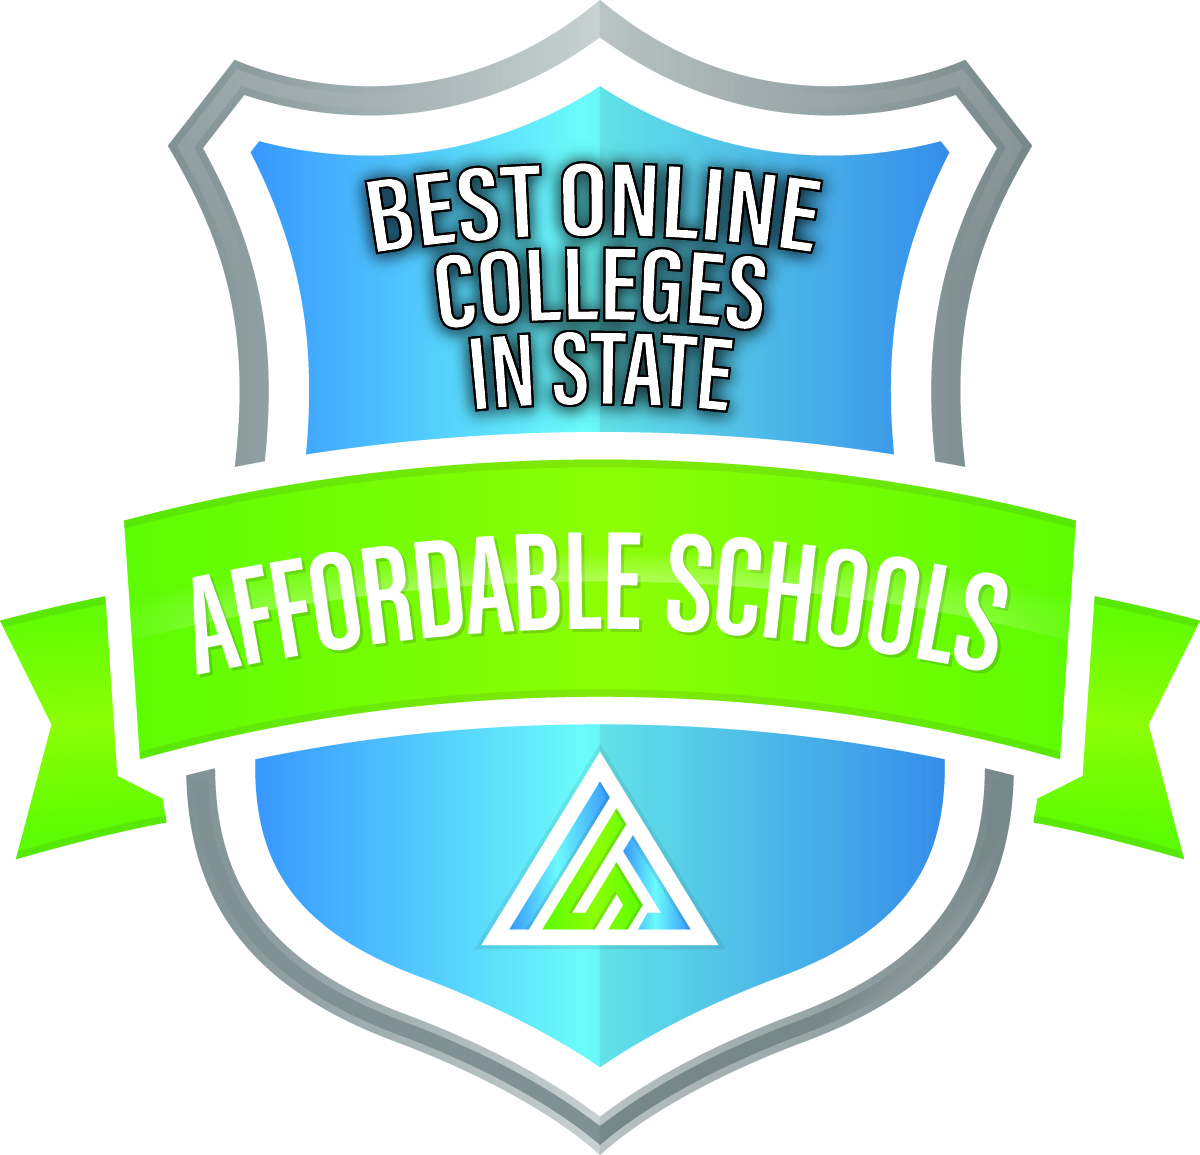 10 Most Affordable Online Colleges in North Carolina 2020 - Affordable  Schools